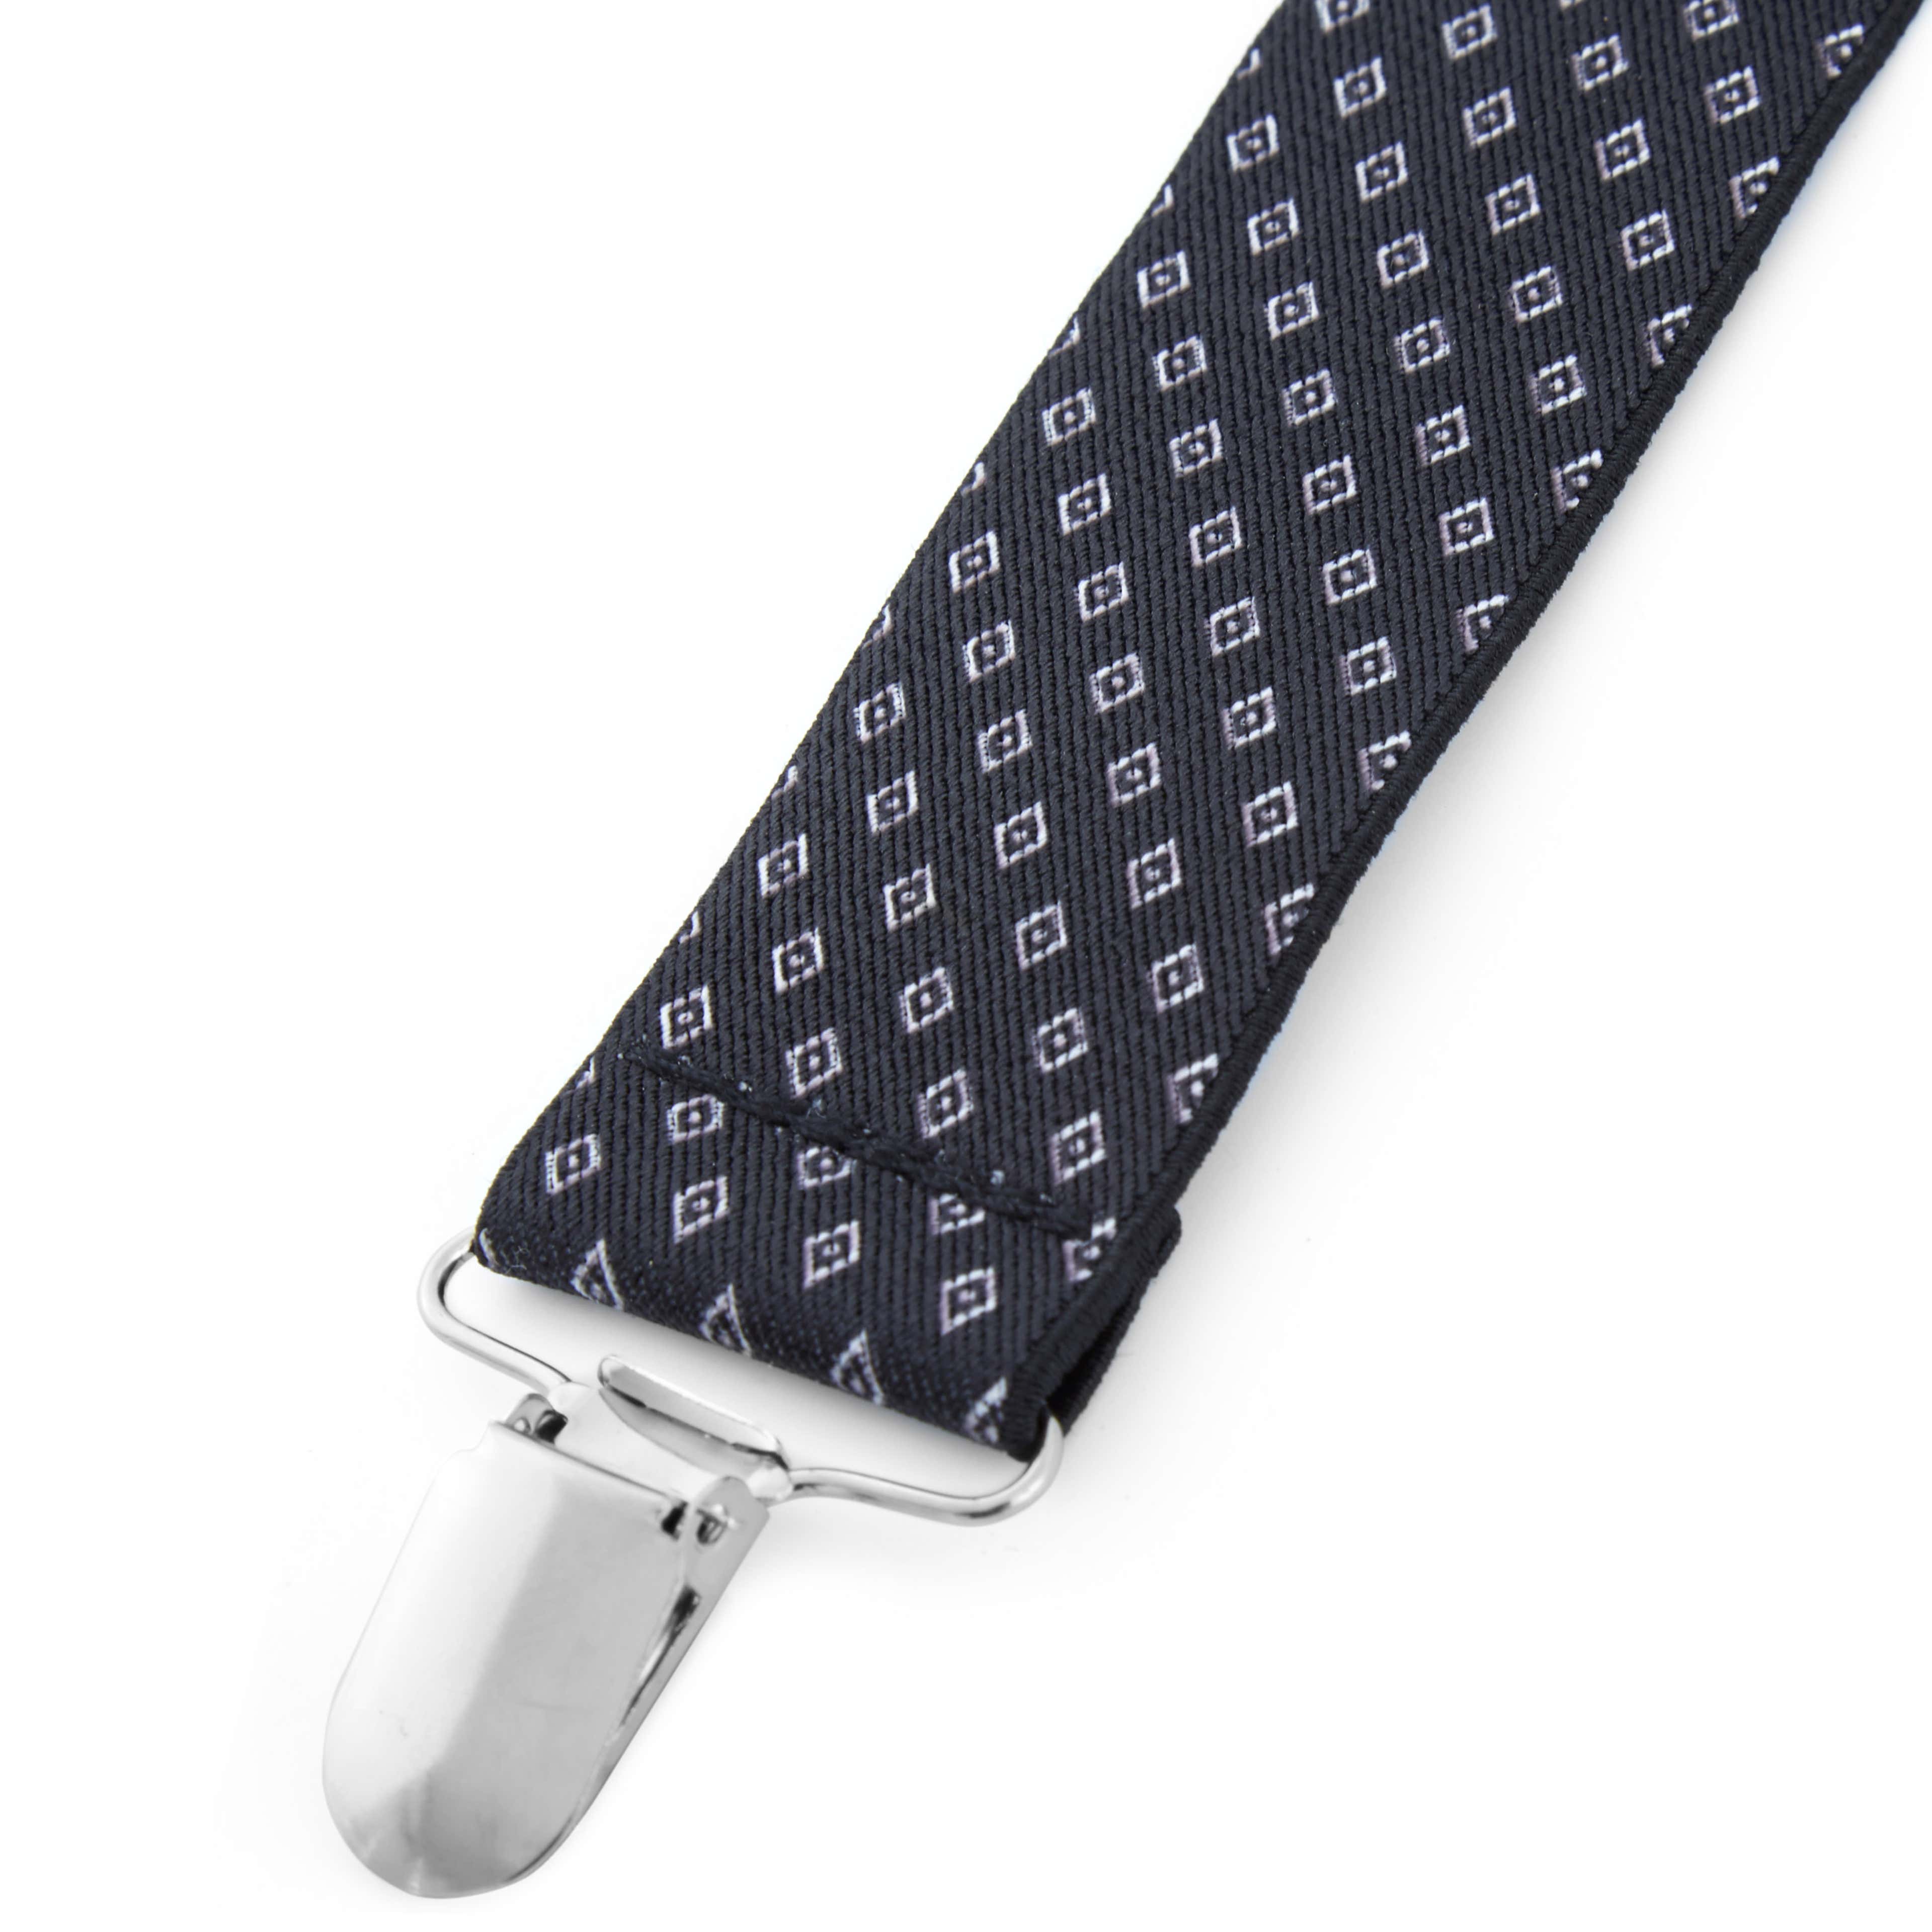 Black Suspenders With Small Diamond Pattern - 2 - hover gallery